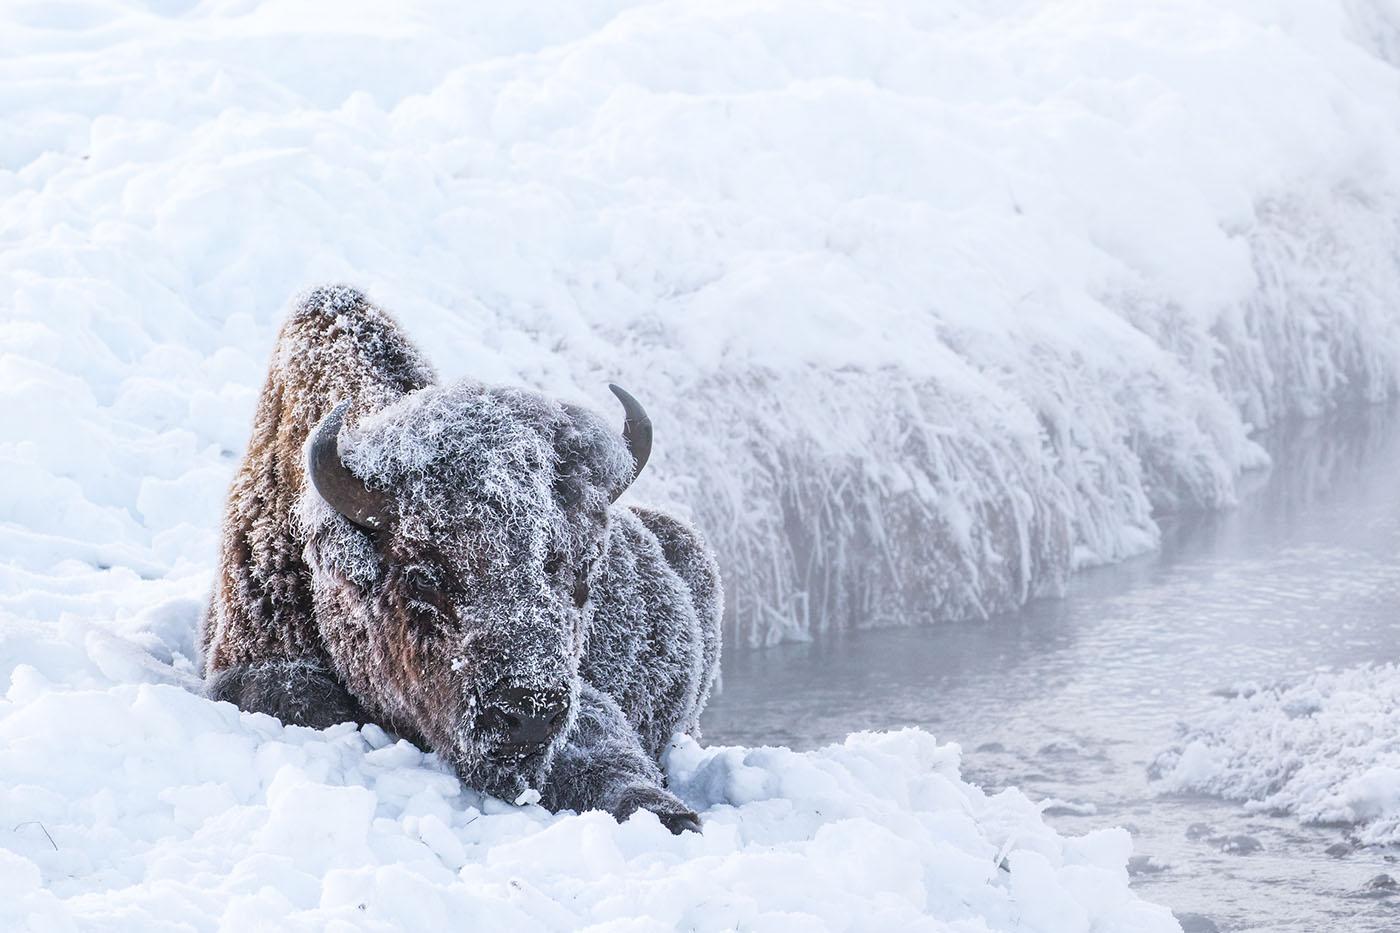 A bison in Yellowstone National Park. Photo: FloridaStock / shutterstock.com